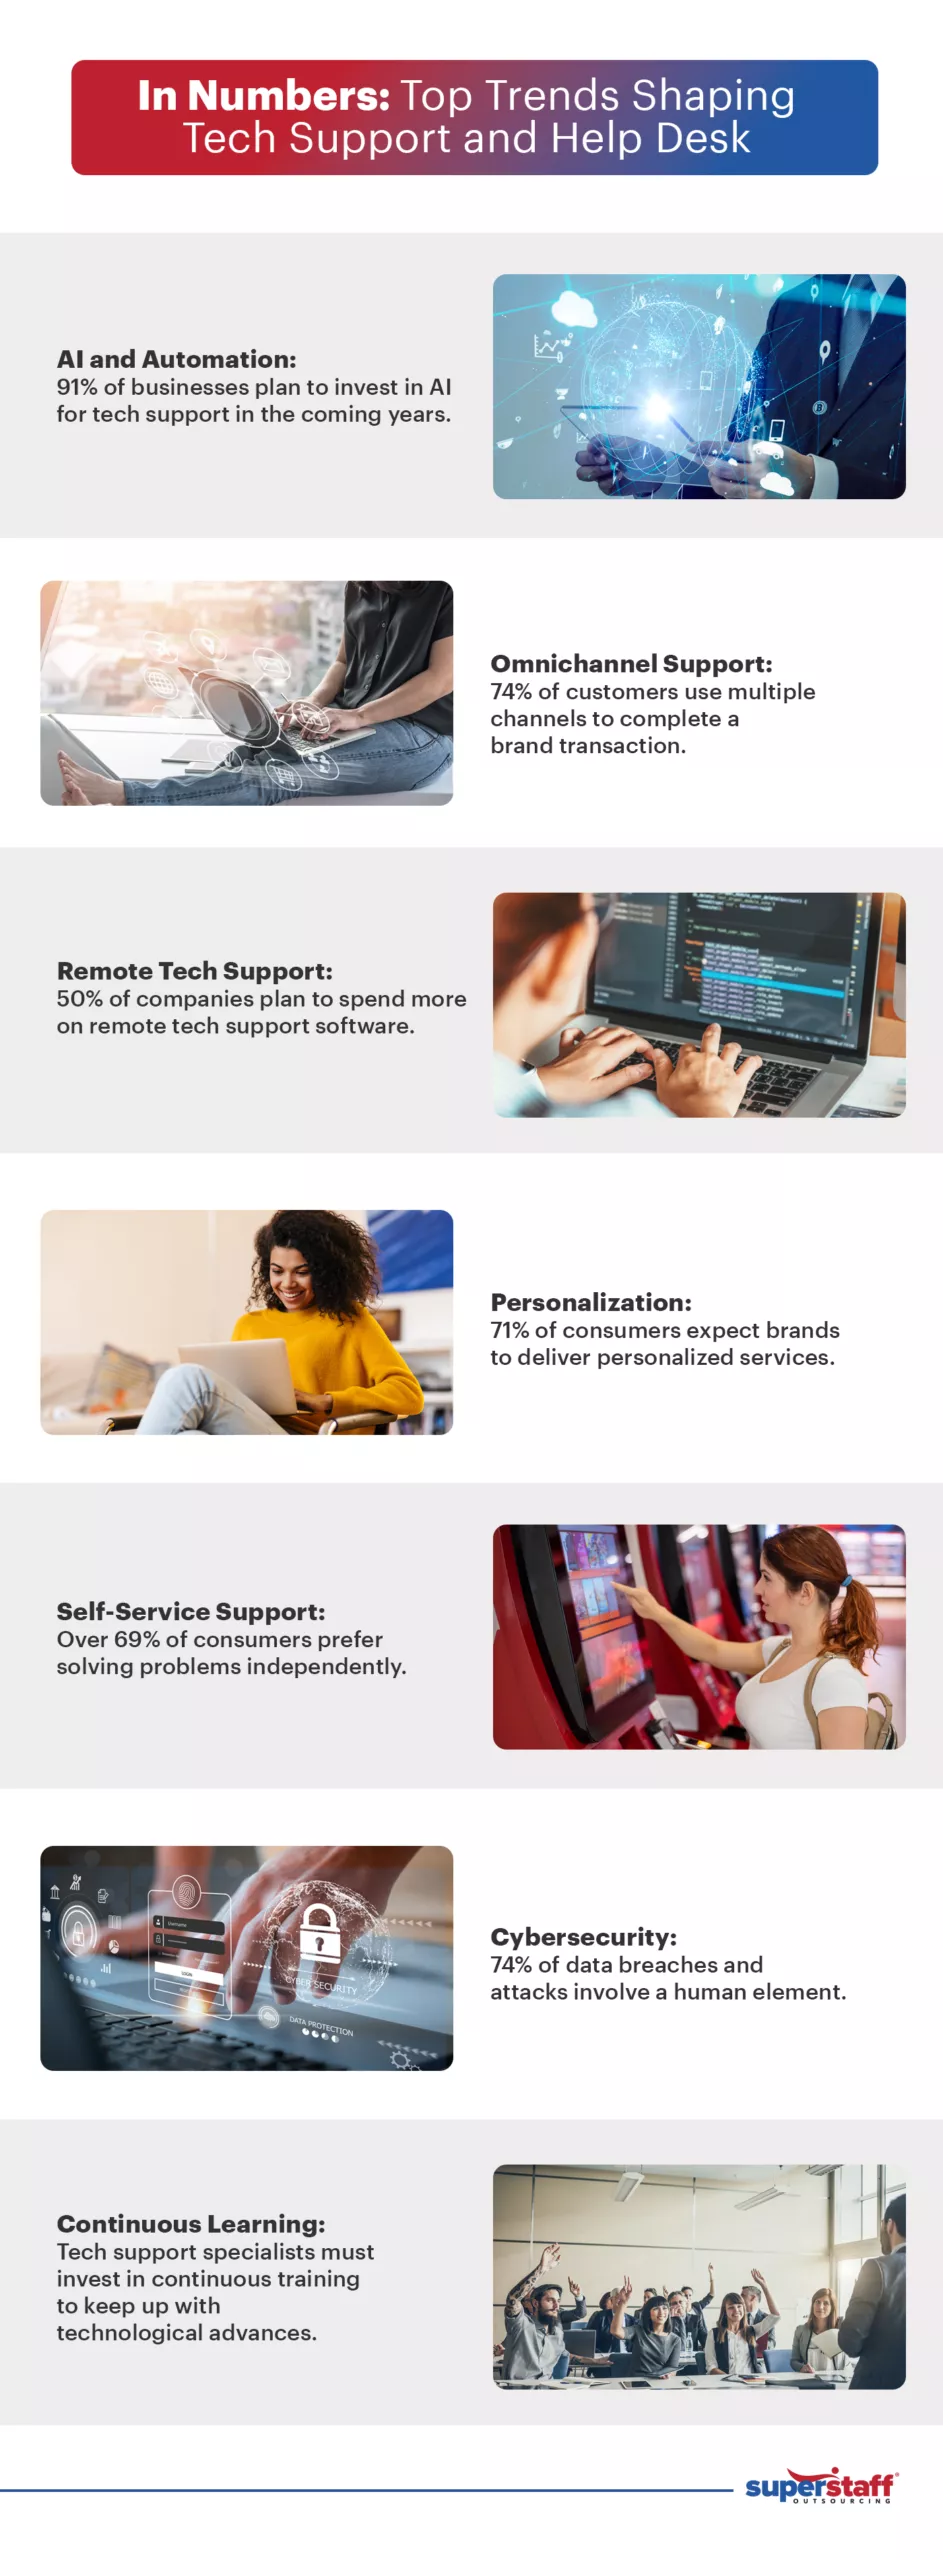 Top trends shaping tech support and help desk infographic